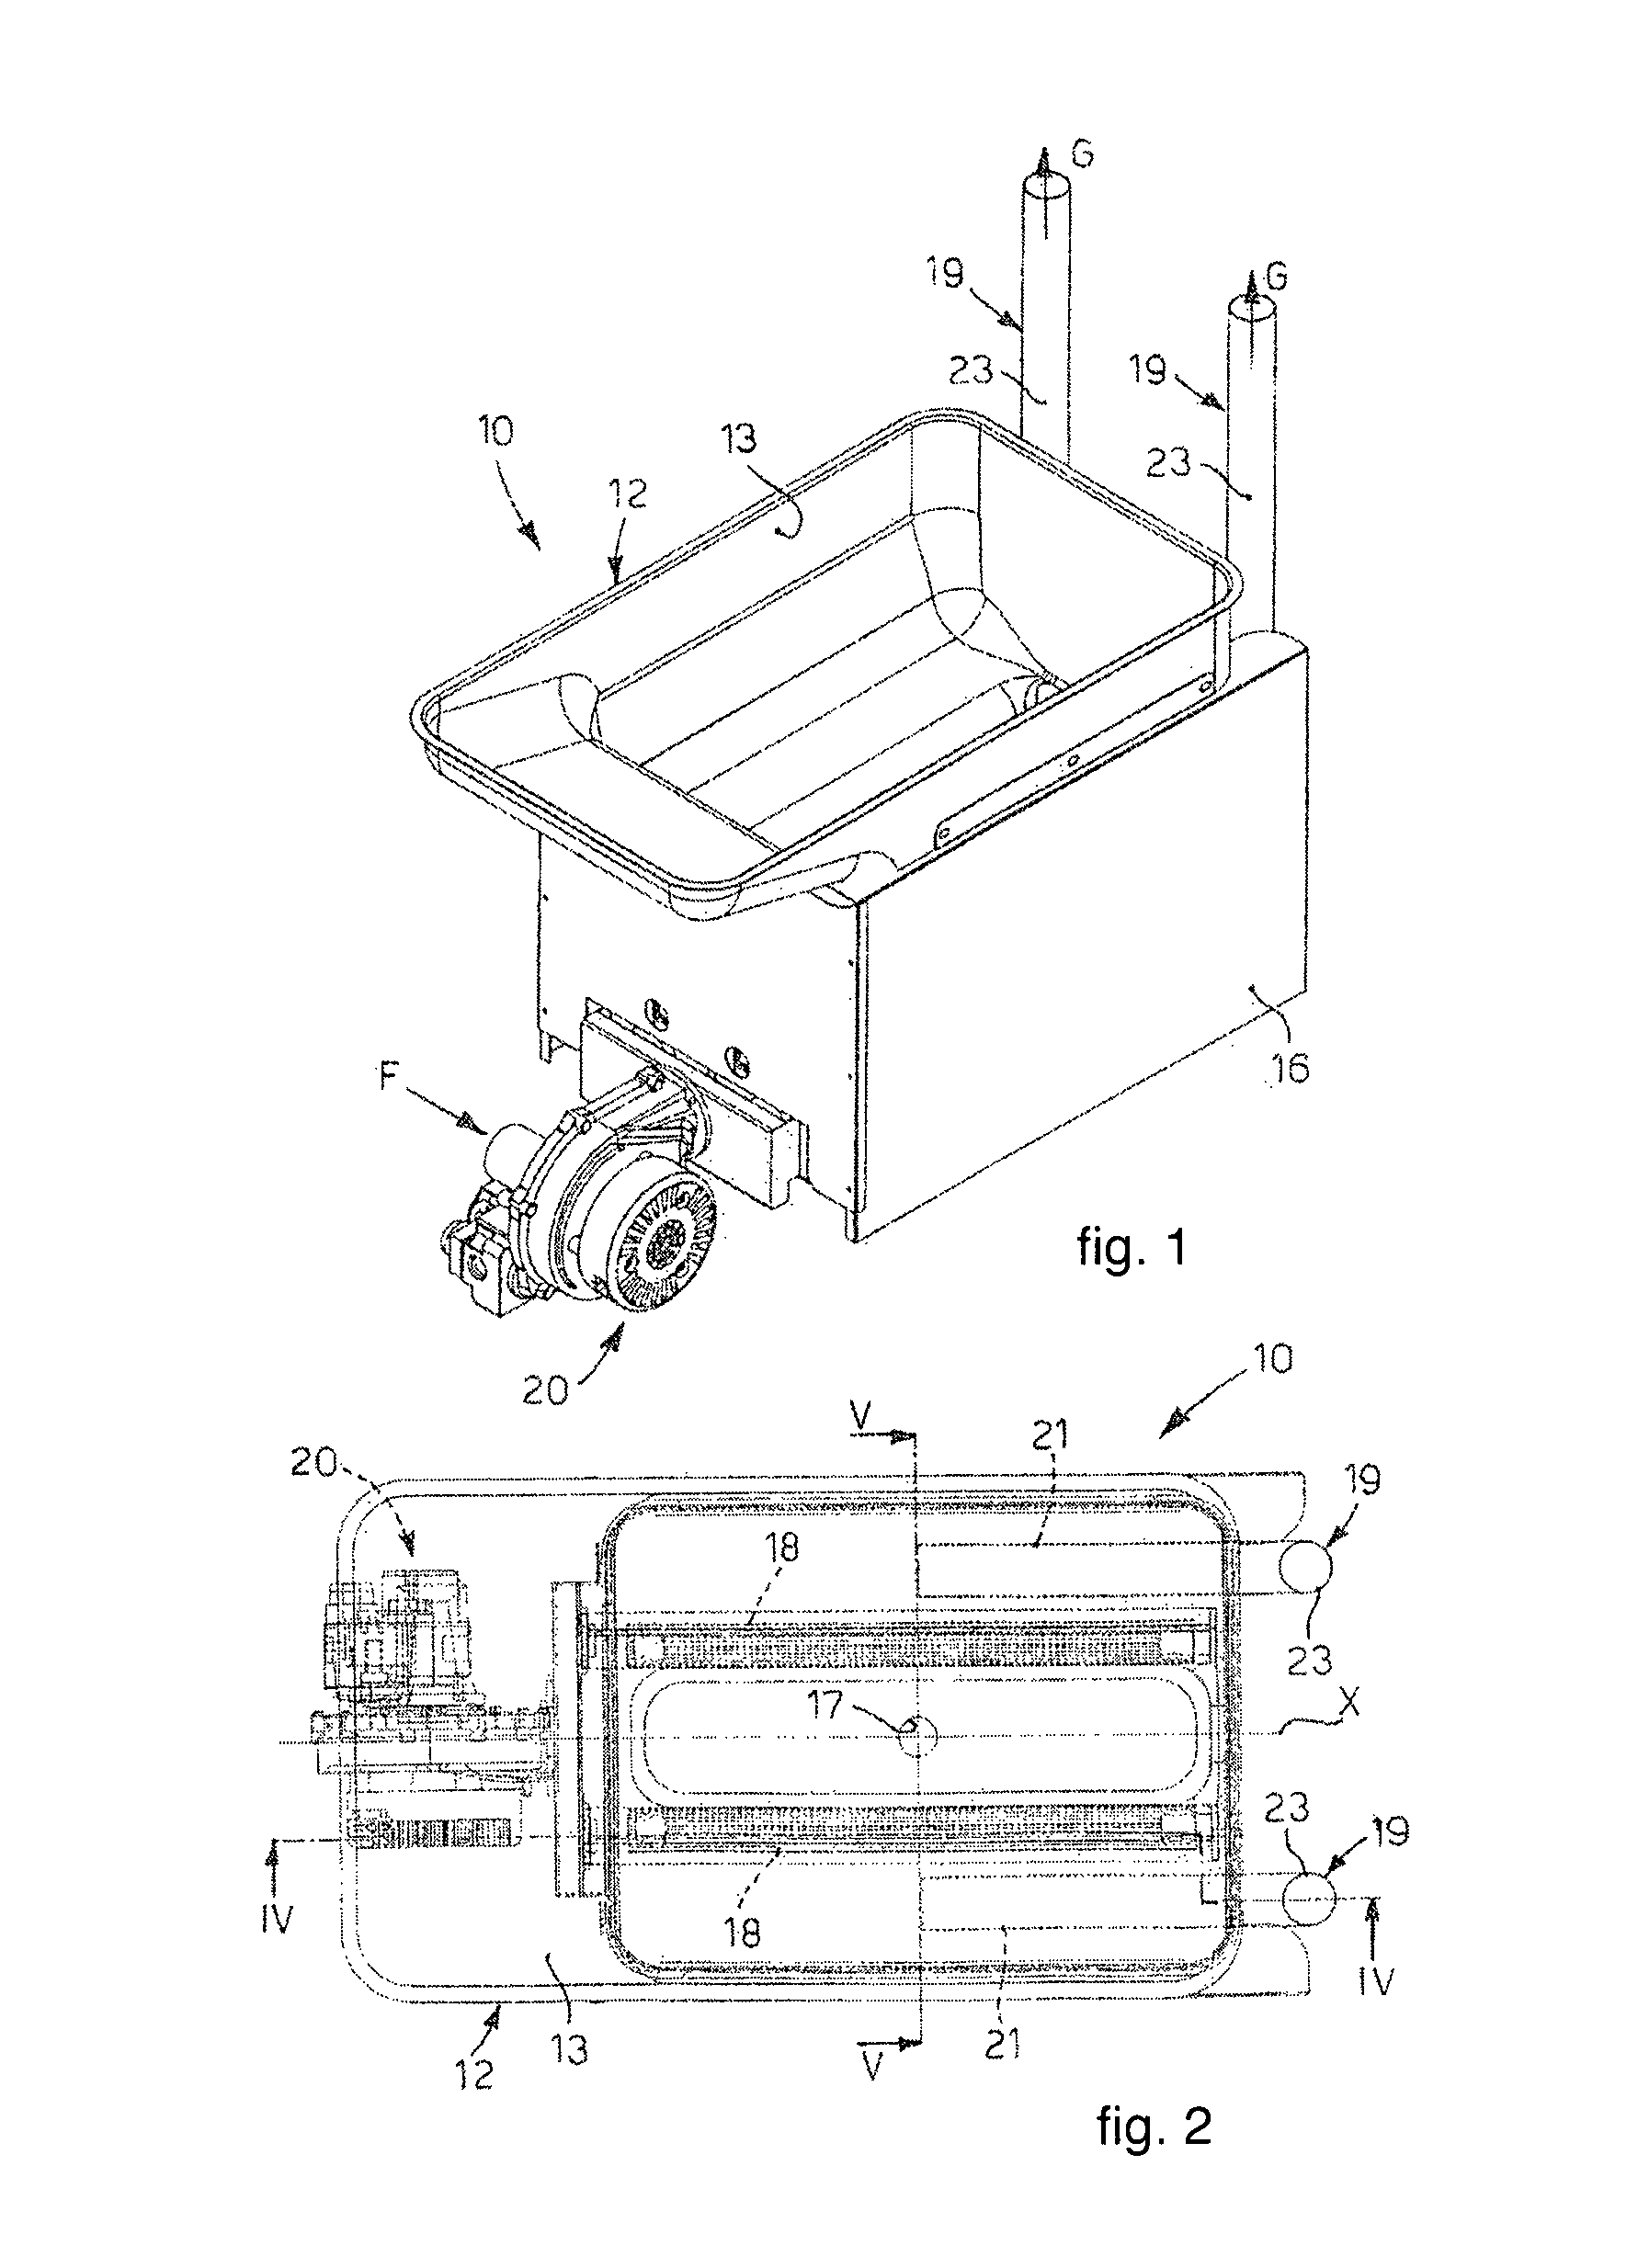 Pan-type apparatus to fry or boil food products